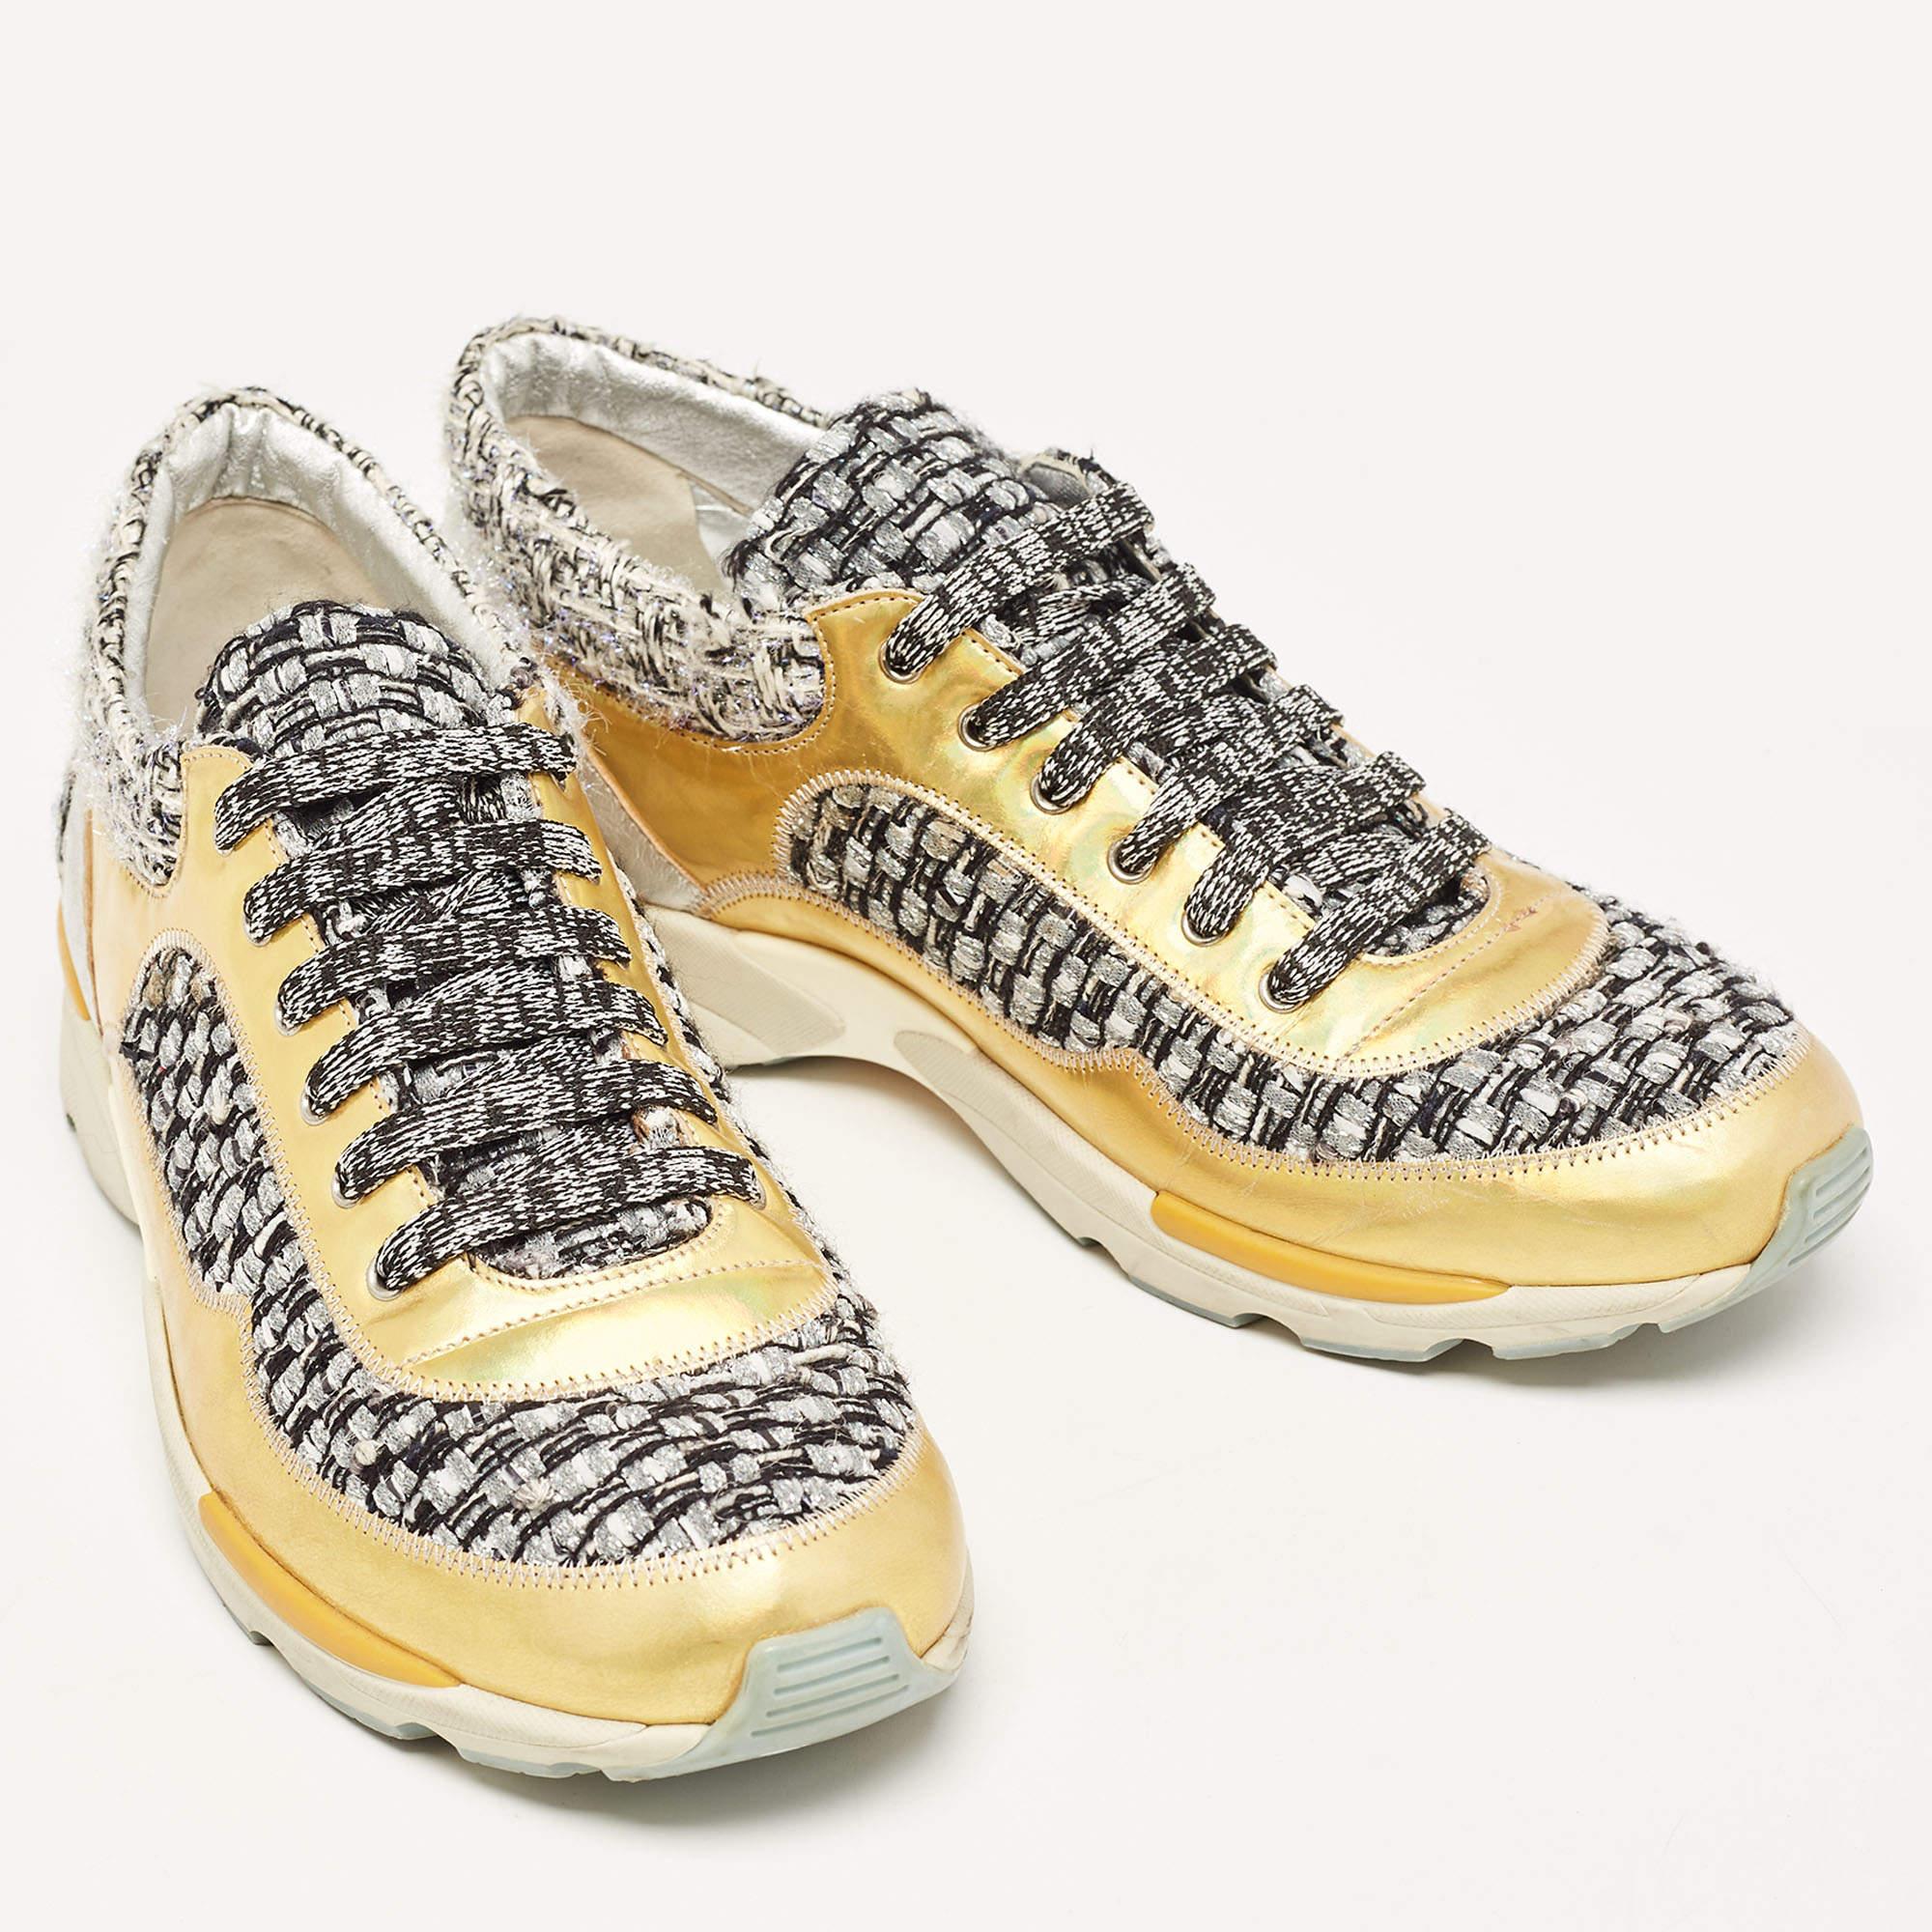 Indulge in luxe comfort with these designer sneakers from the house of Chanel. Featuring lace-ups and logo details, they are crafted from tweed & leather and finished with rubber soles. The perfect addition to a multitude of casual outfits and